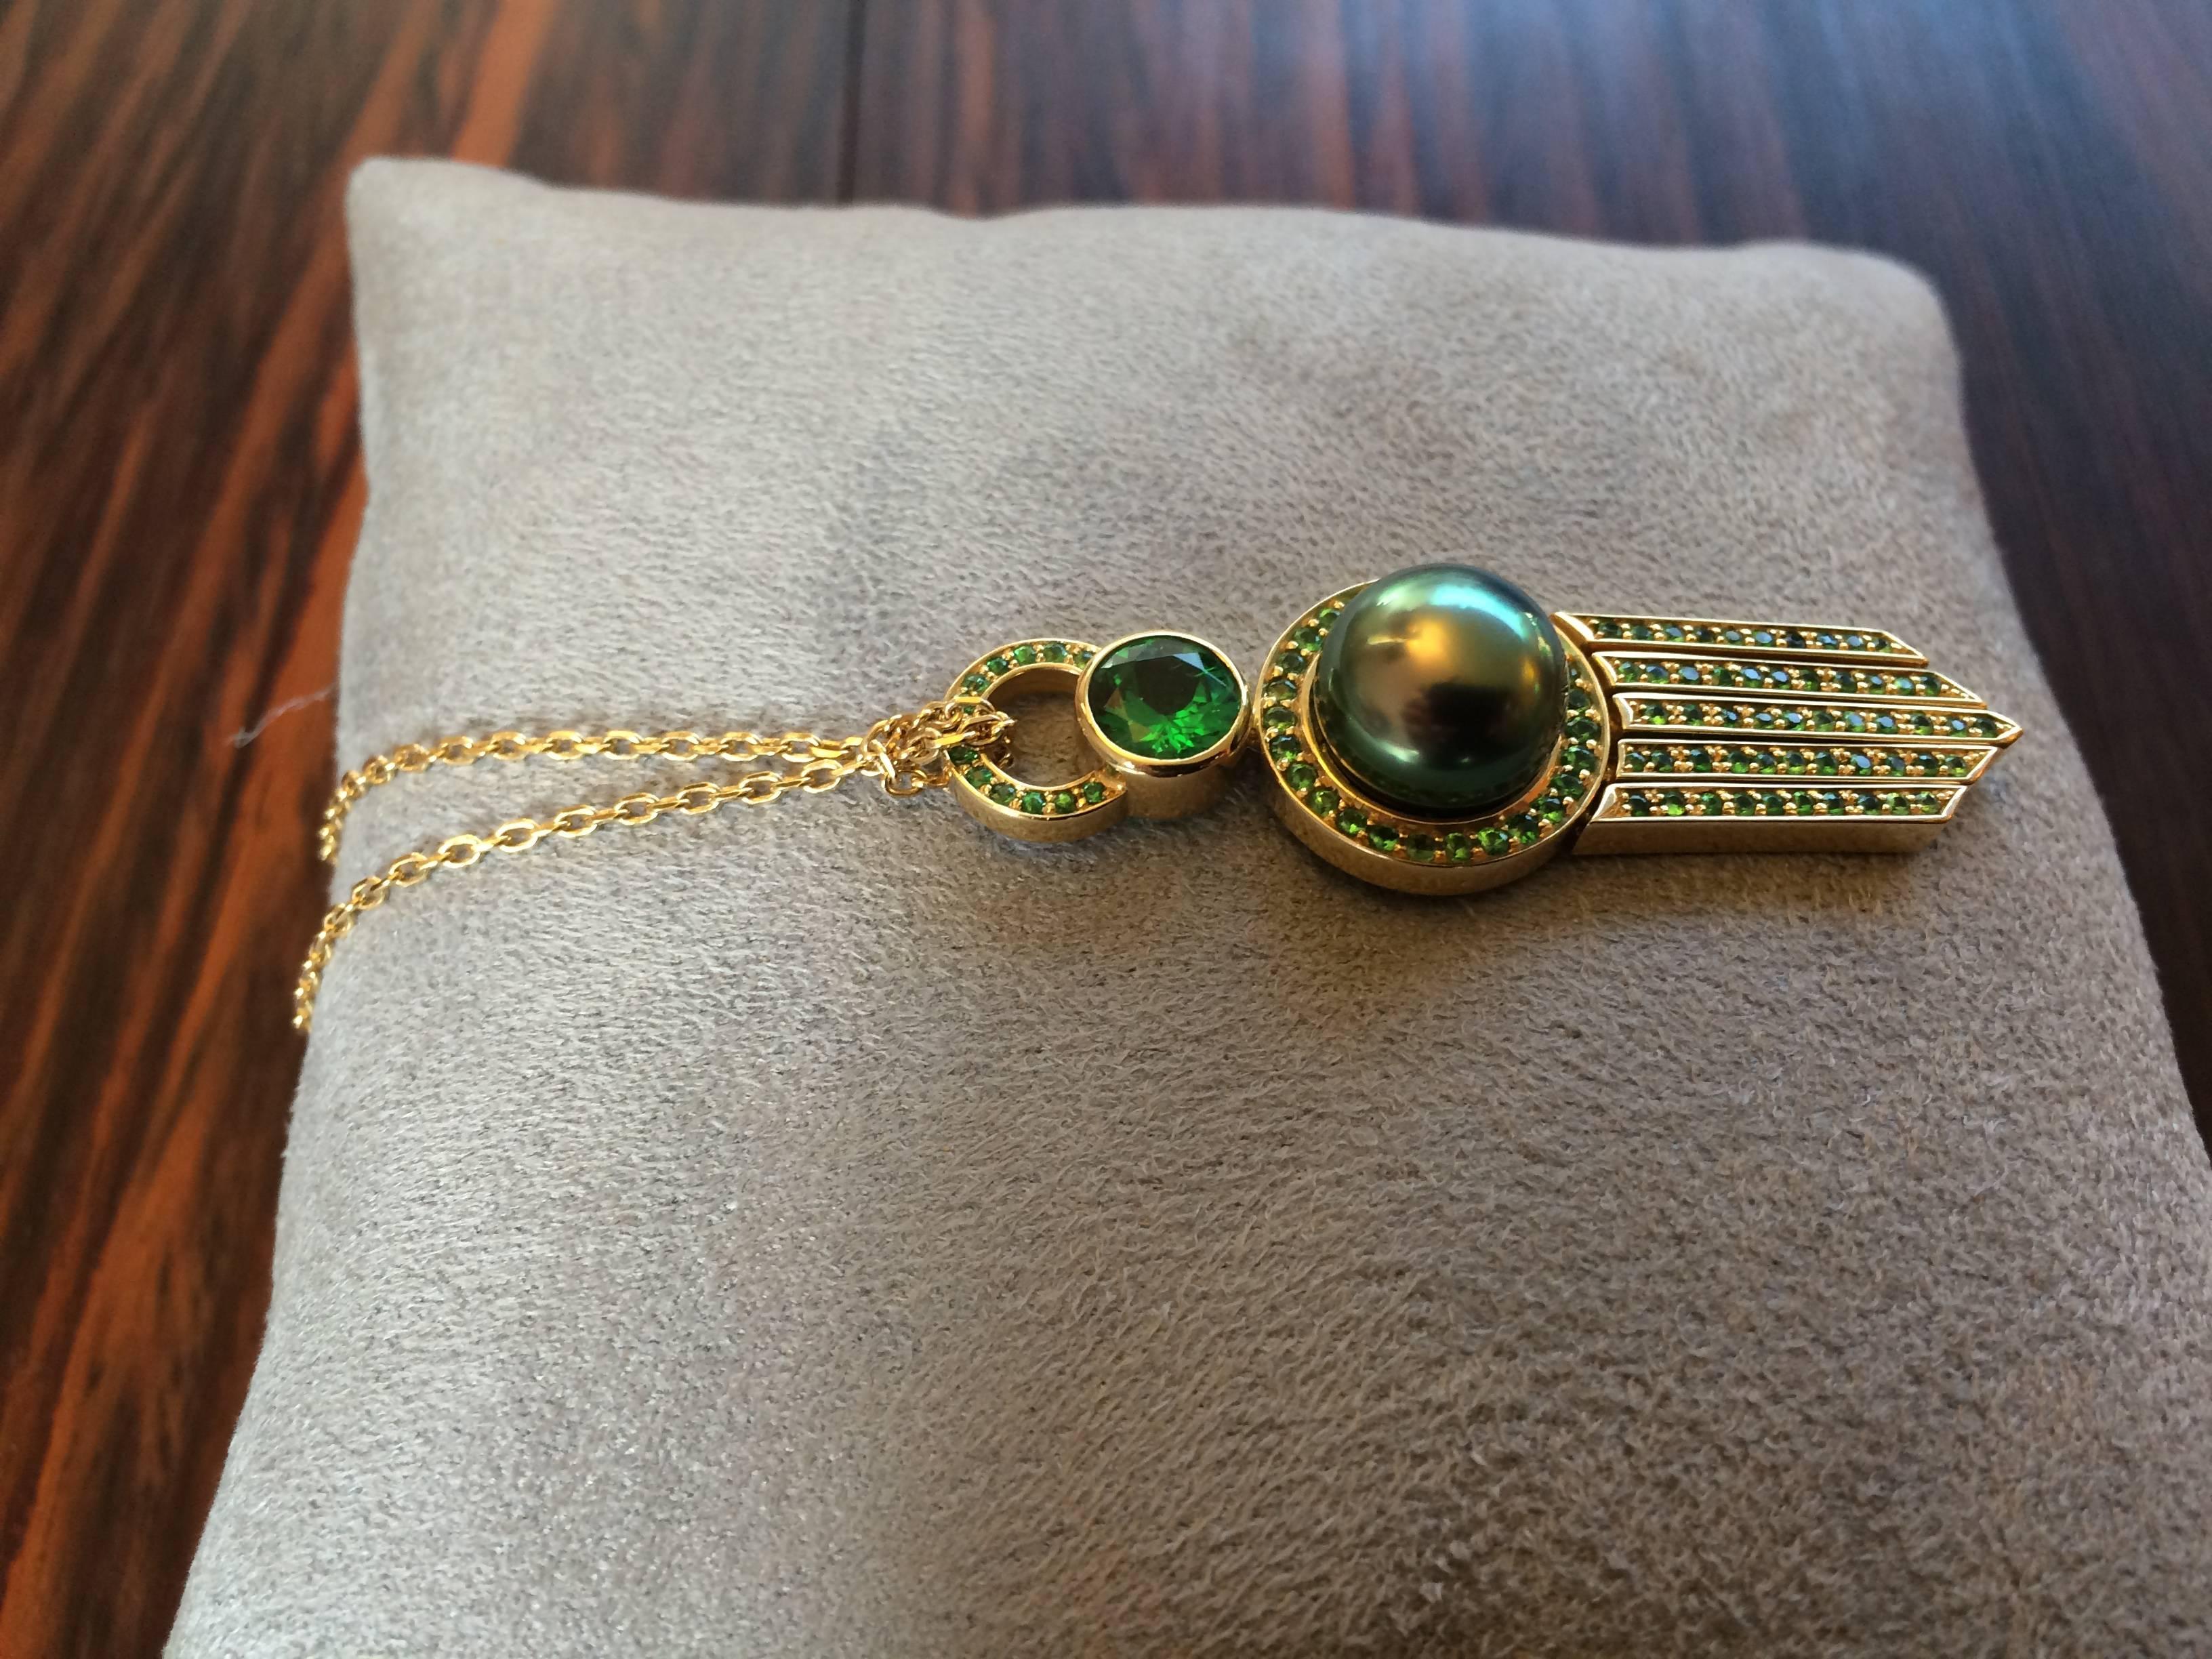 This pendant has been handcrafted in 18ct yellow gold and is a unique one of a kind piece. The large natural tsavorite weighs 0.93ct and the total tsavorite weight is 2.20ct. 

The black Tahitian pearl is 11mm in diameter and is an A grade pearl. It